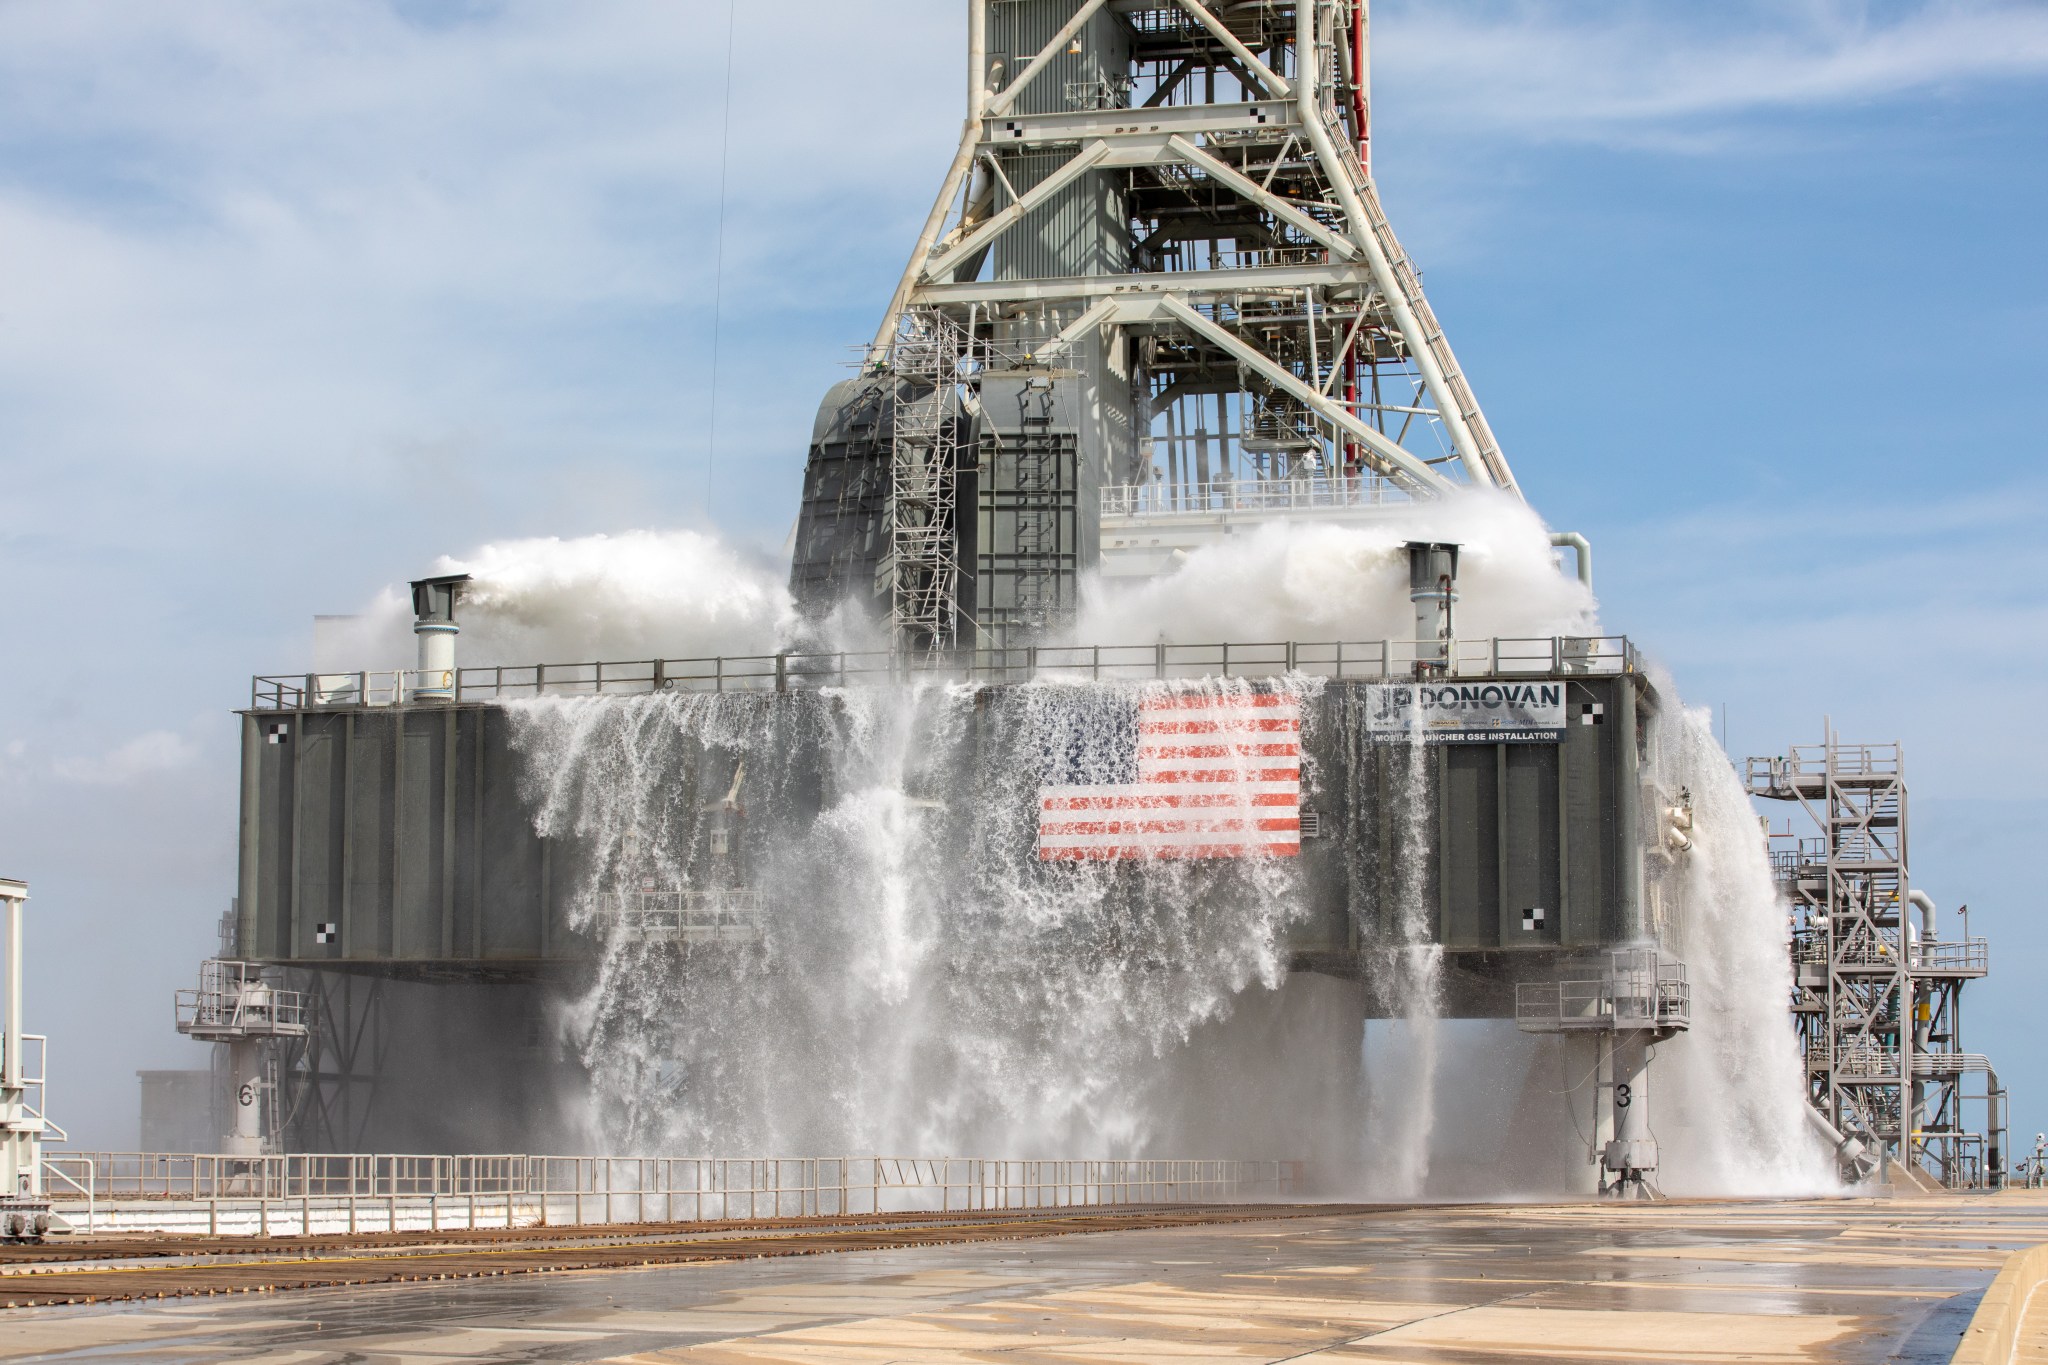 A wet flow test at Launch Pad 39B on September 13, 2019, tests the sound suppression system.